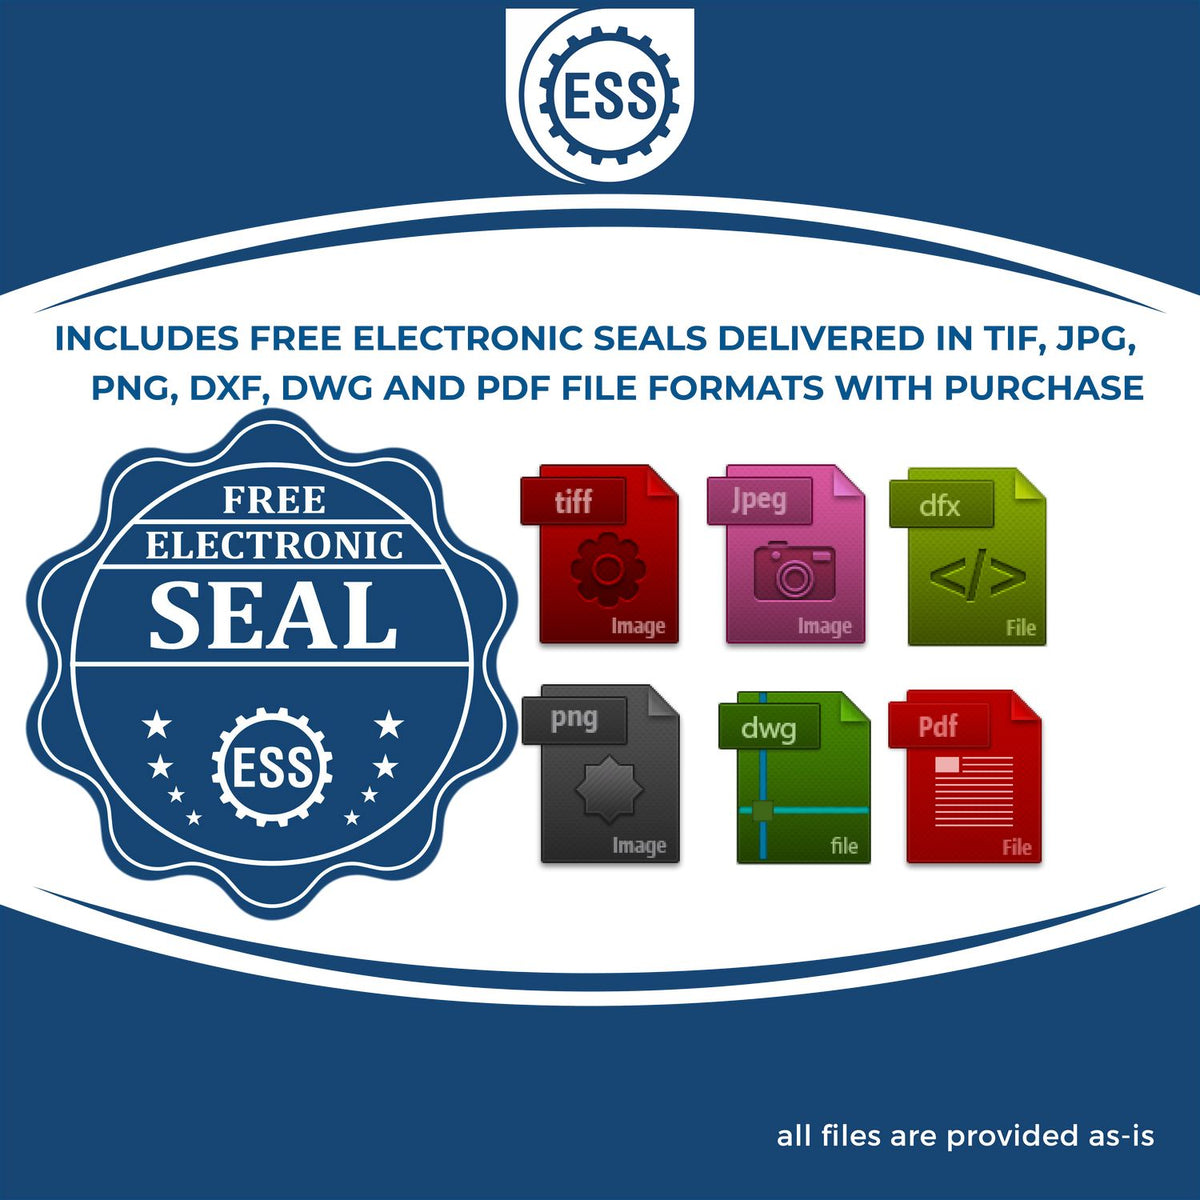 An infographic for the free electronic seal for the Heavy-Duty North Dakota Rectangular Notary Stamp illustrating the different file type icons such as DXF, DWG, TIF, JPG and PNG.